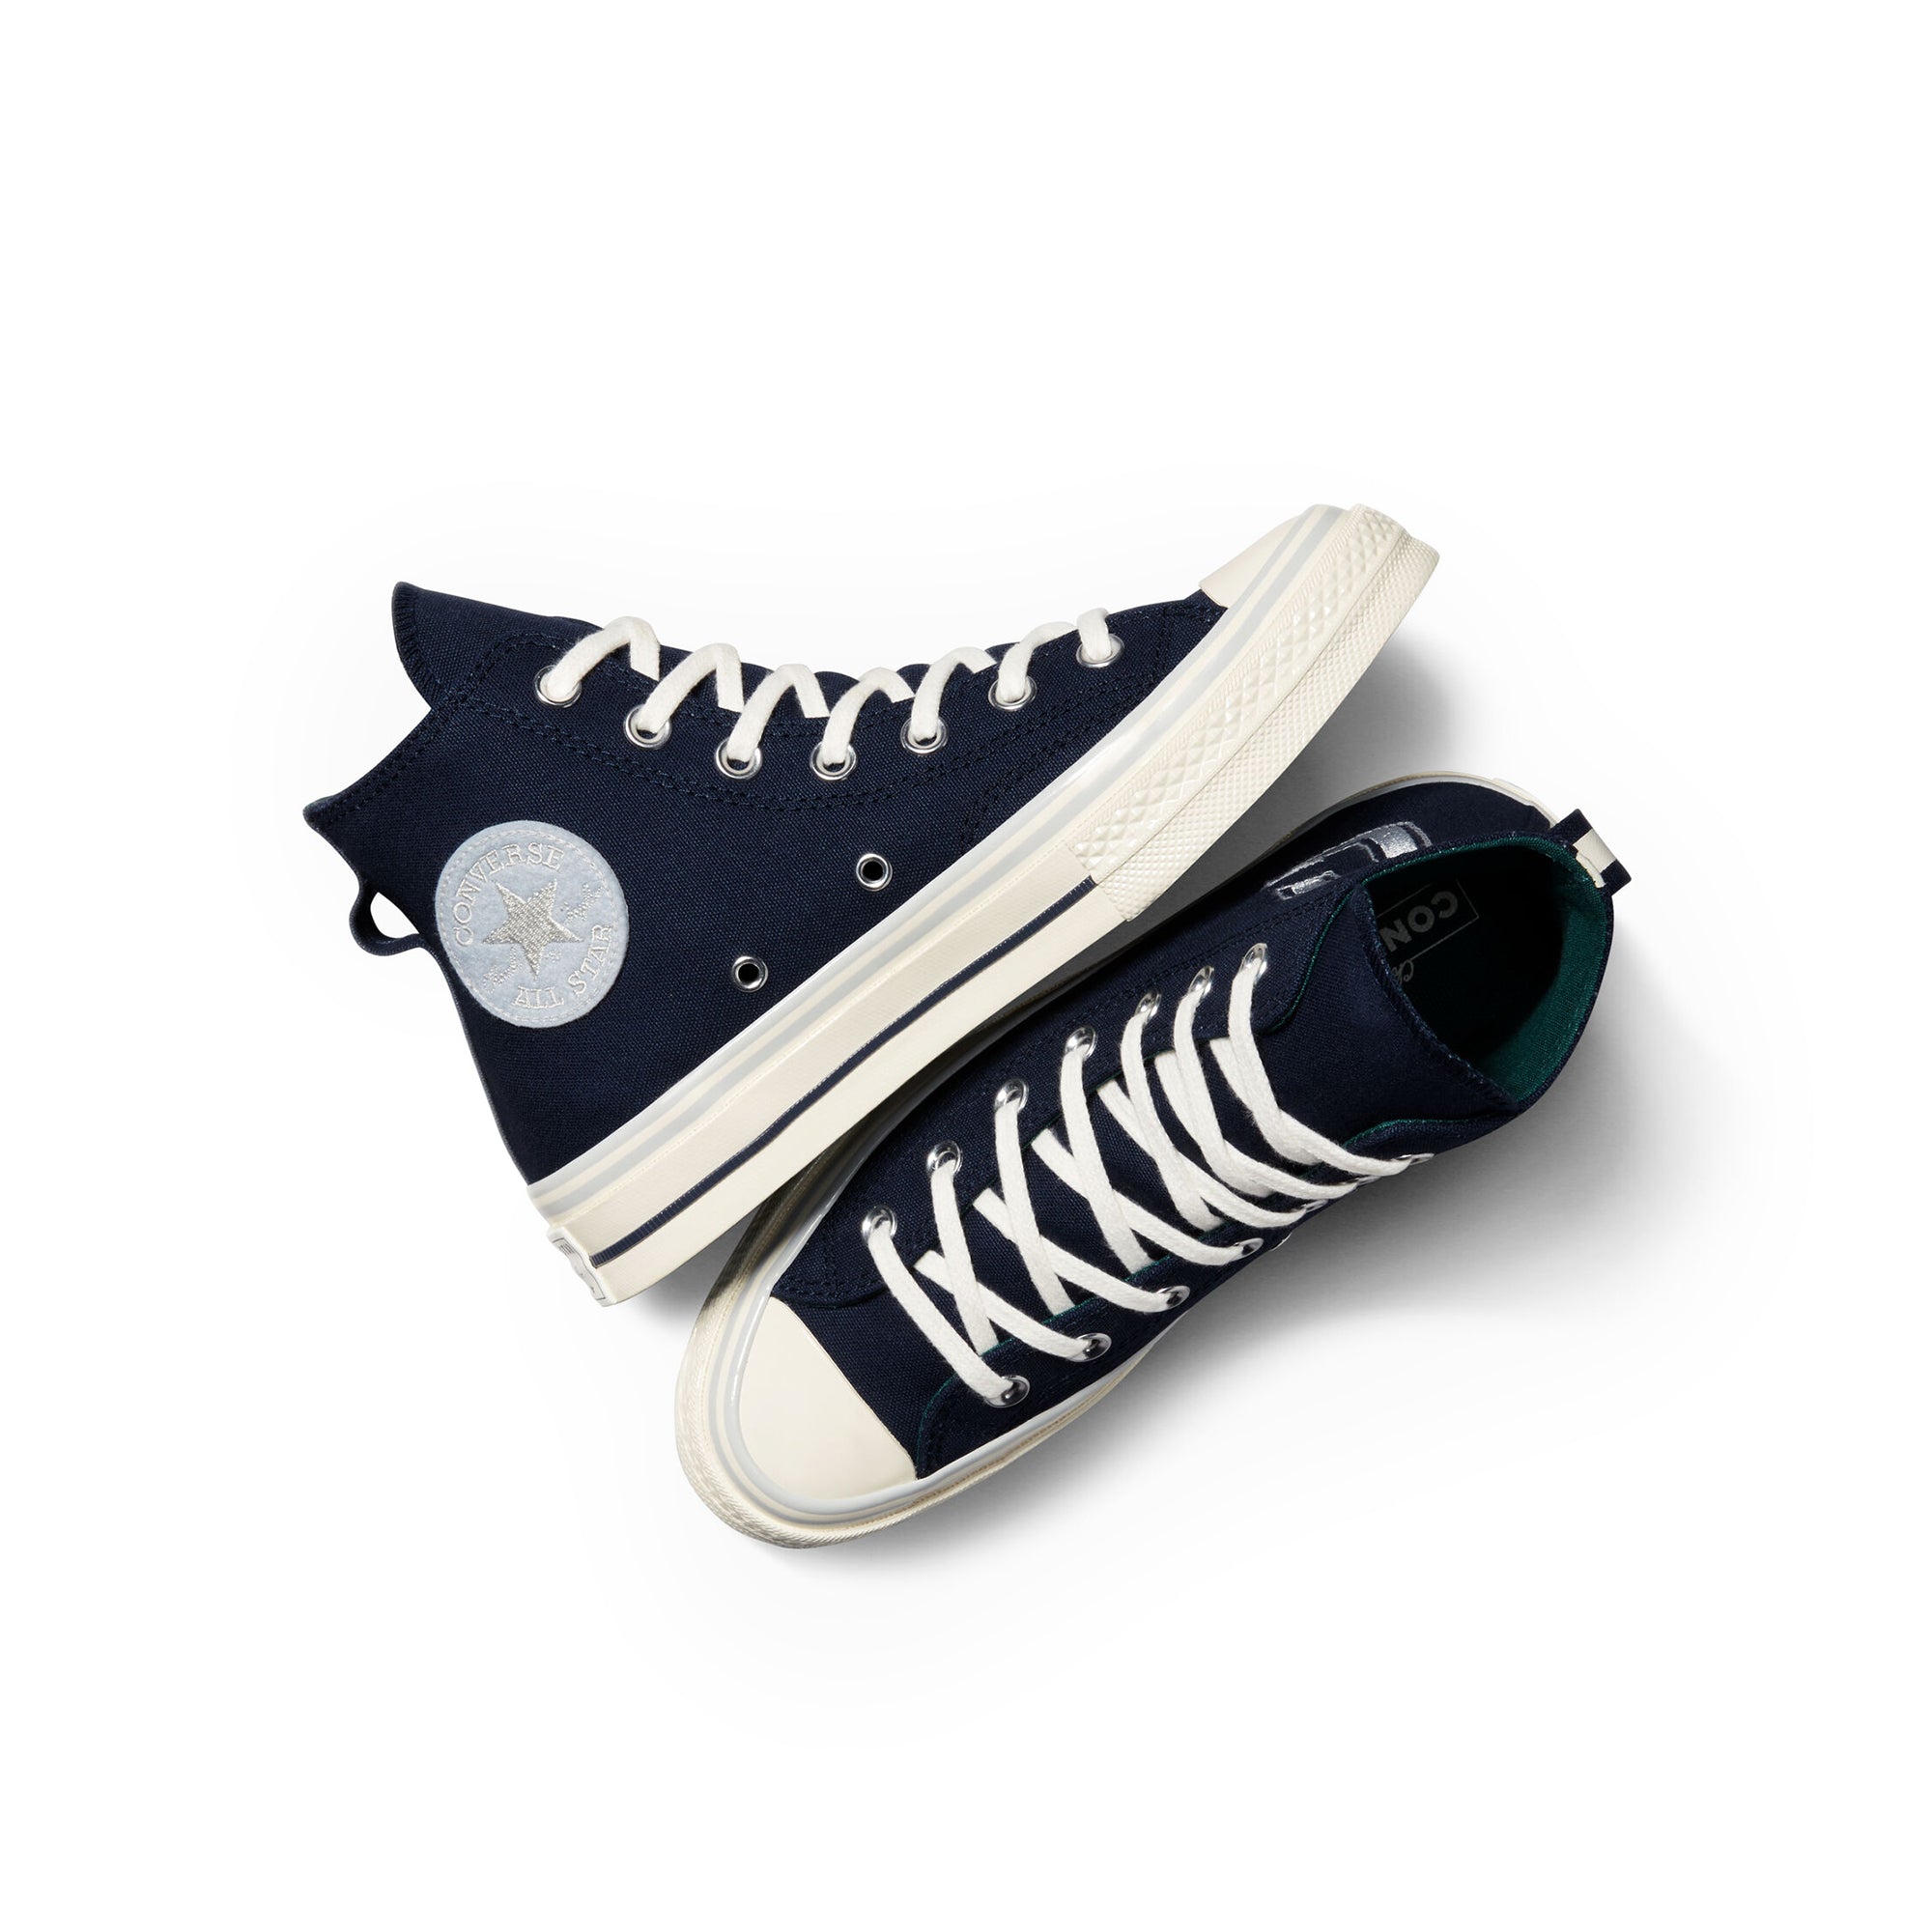 Converse By You | Design Your Own Custom Shoes. Converse.com